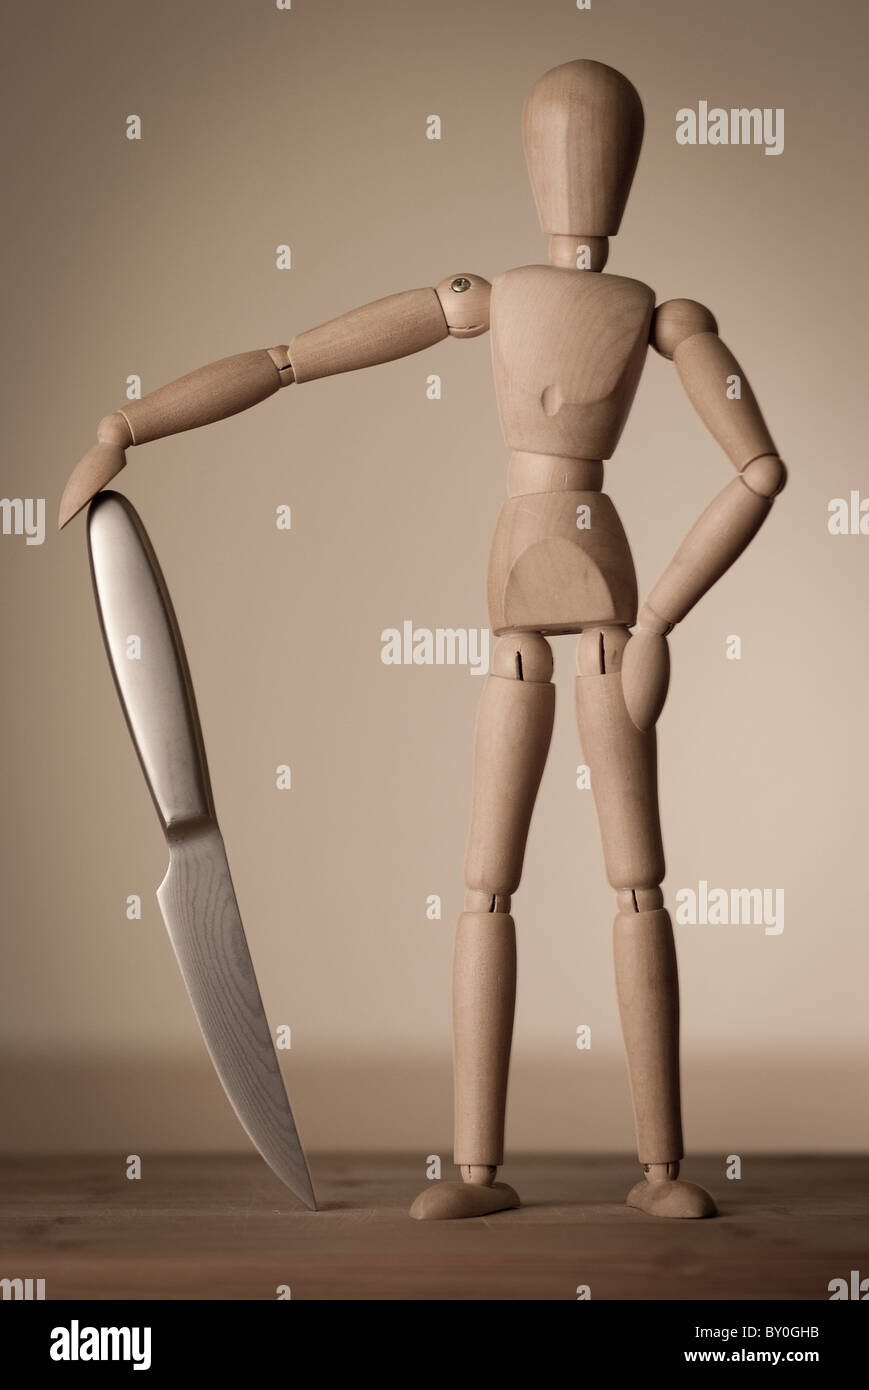 A wooden figure (jointed doll) posing with a knife Stock Photo